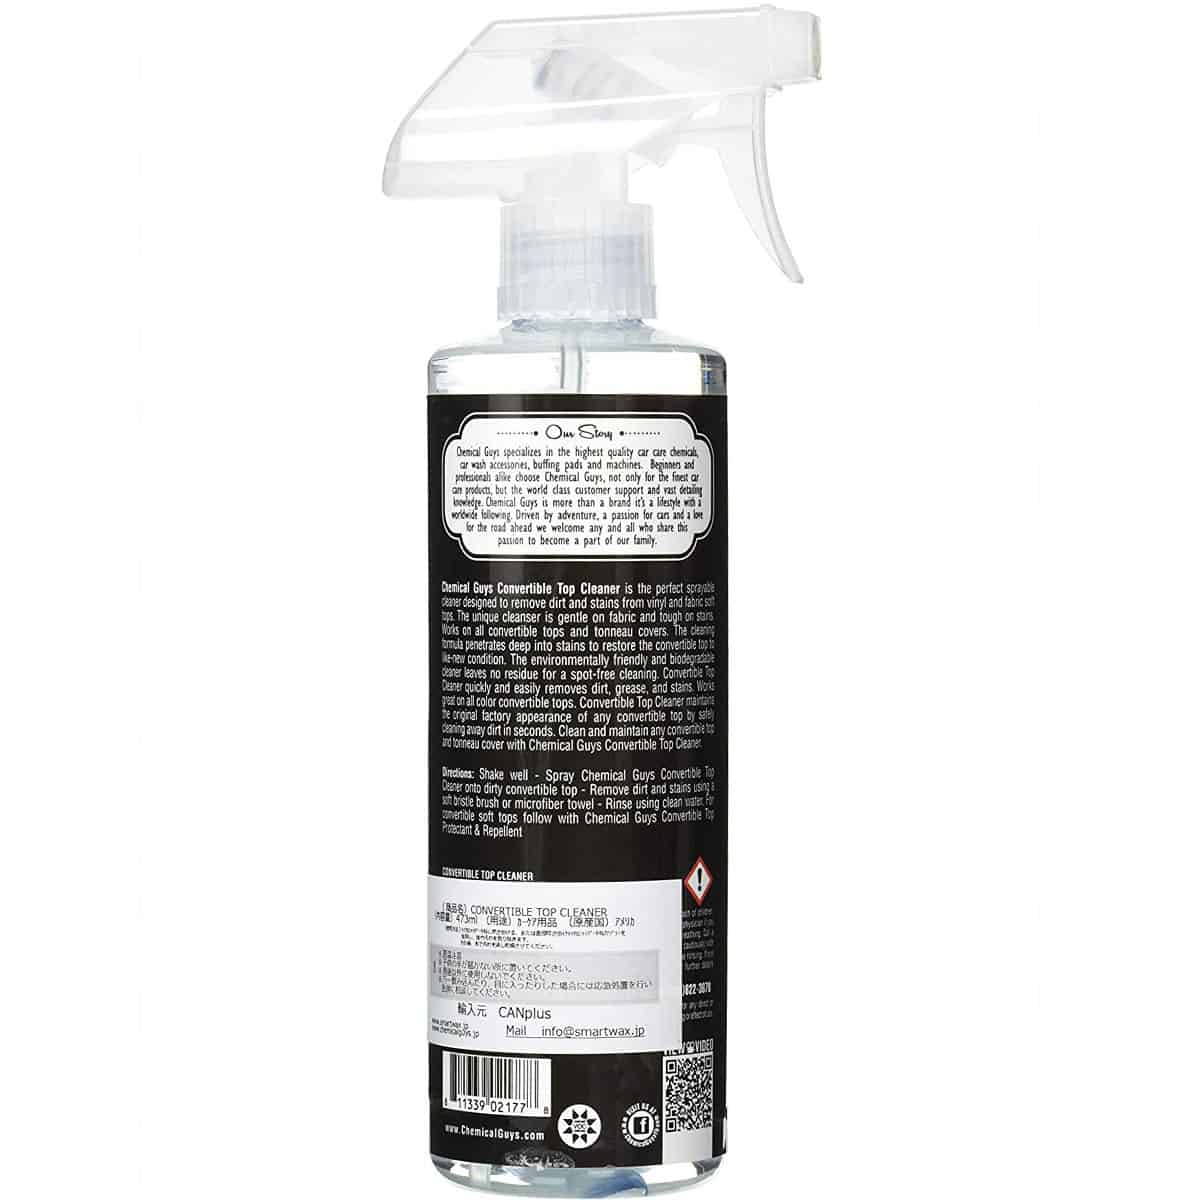 Chemical Guys Convertible Top Cleaner Instructions